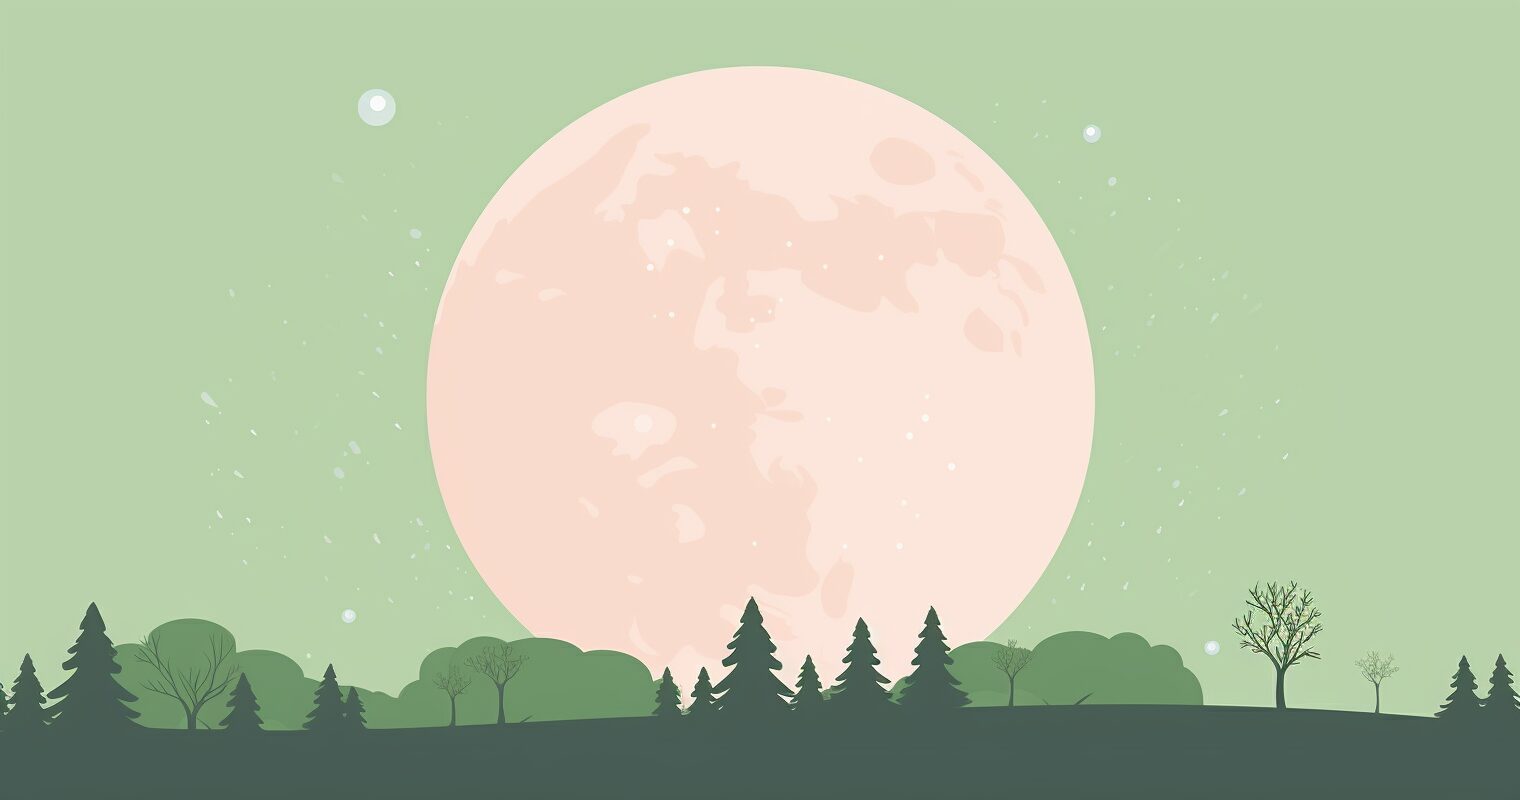 A full moon rising over a forest.